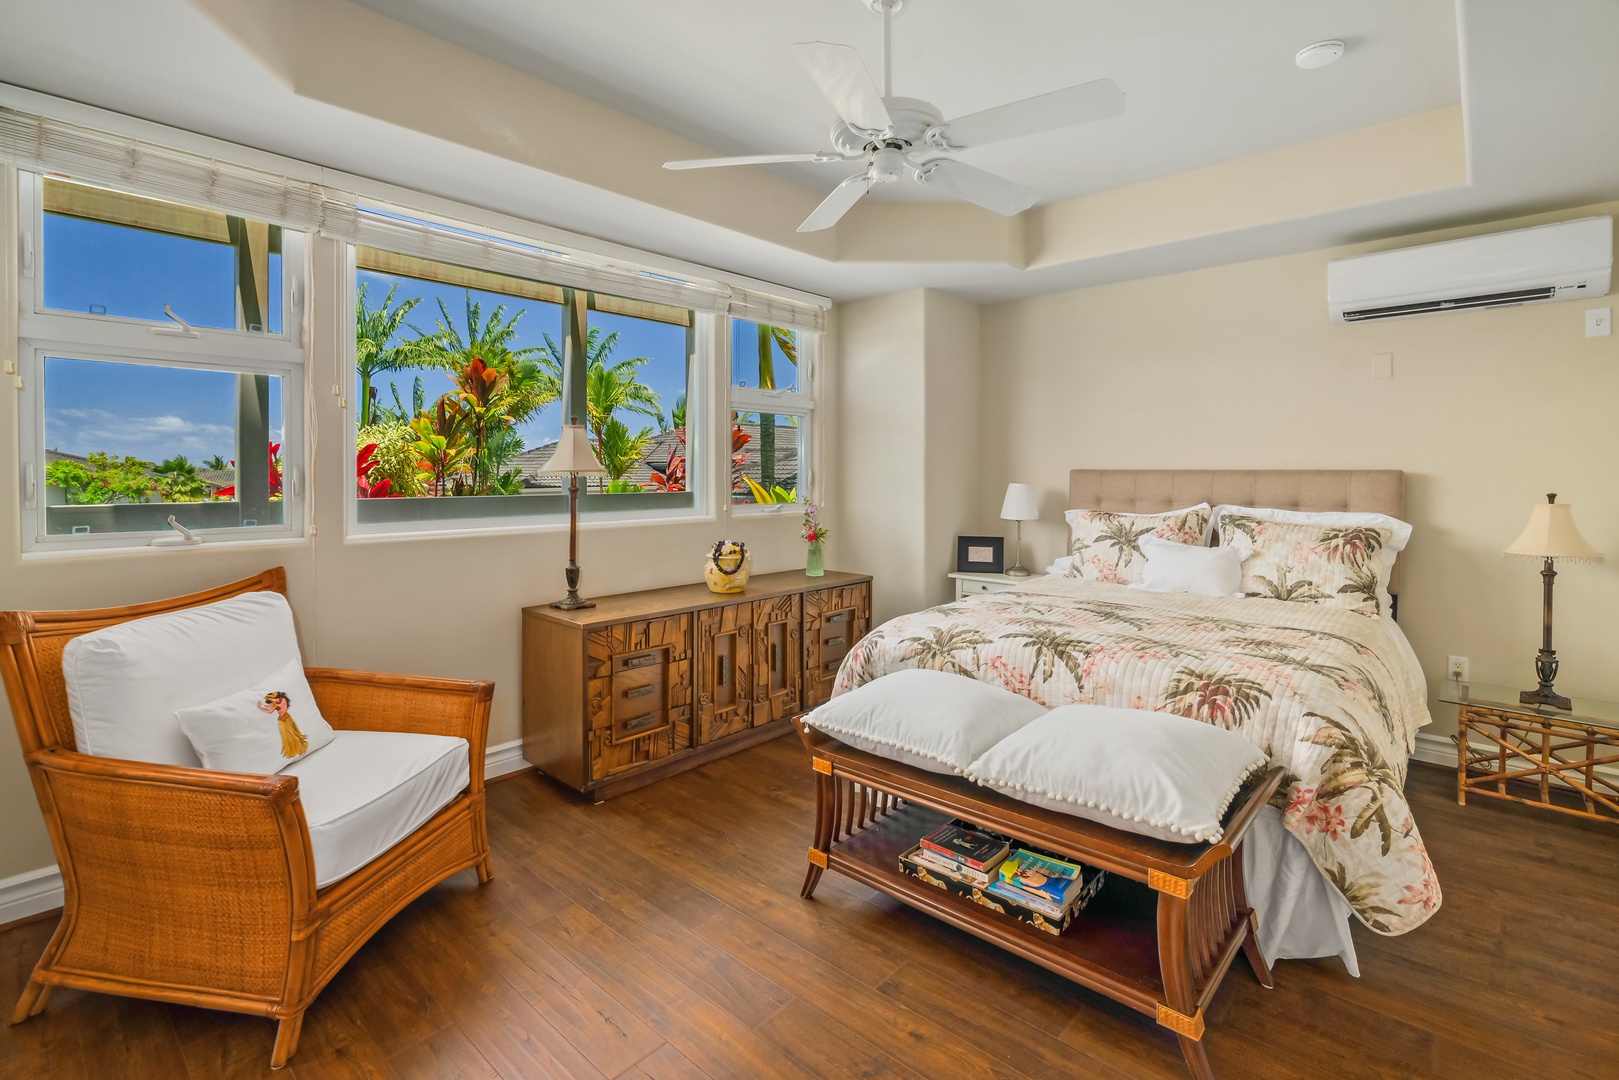 Princeville Vacation Rentals, Noelani Kai - The lower-level suite is a haven for relaxation